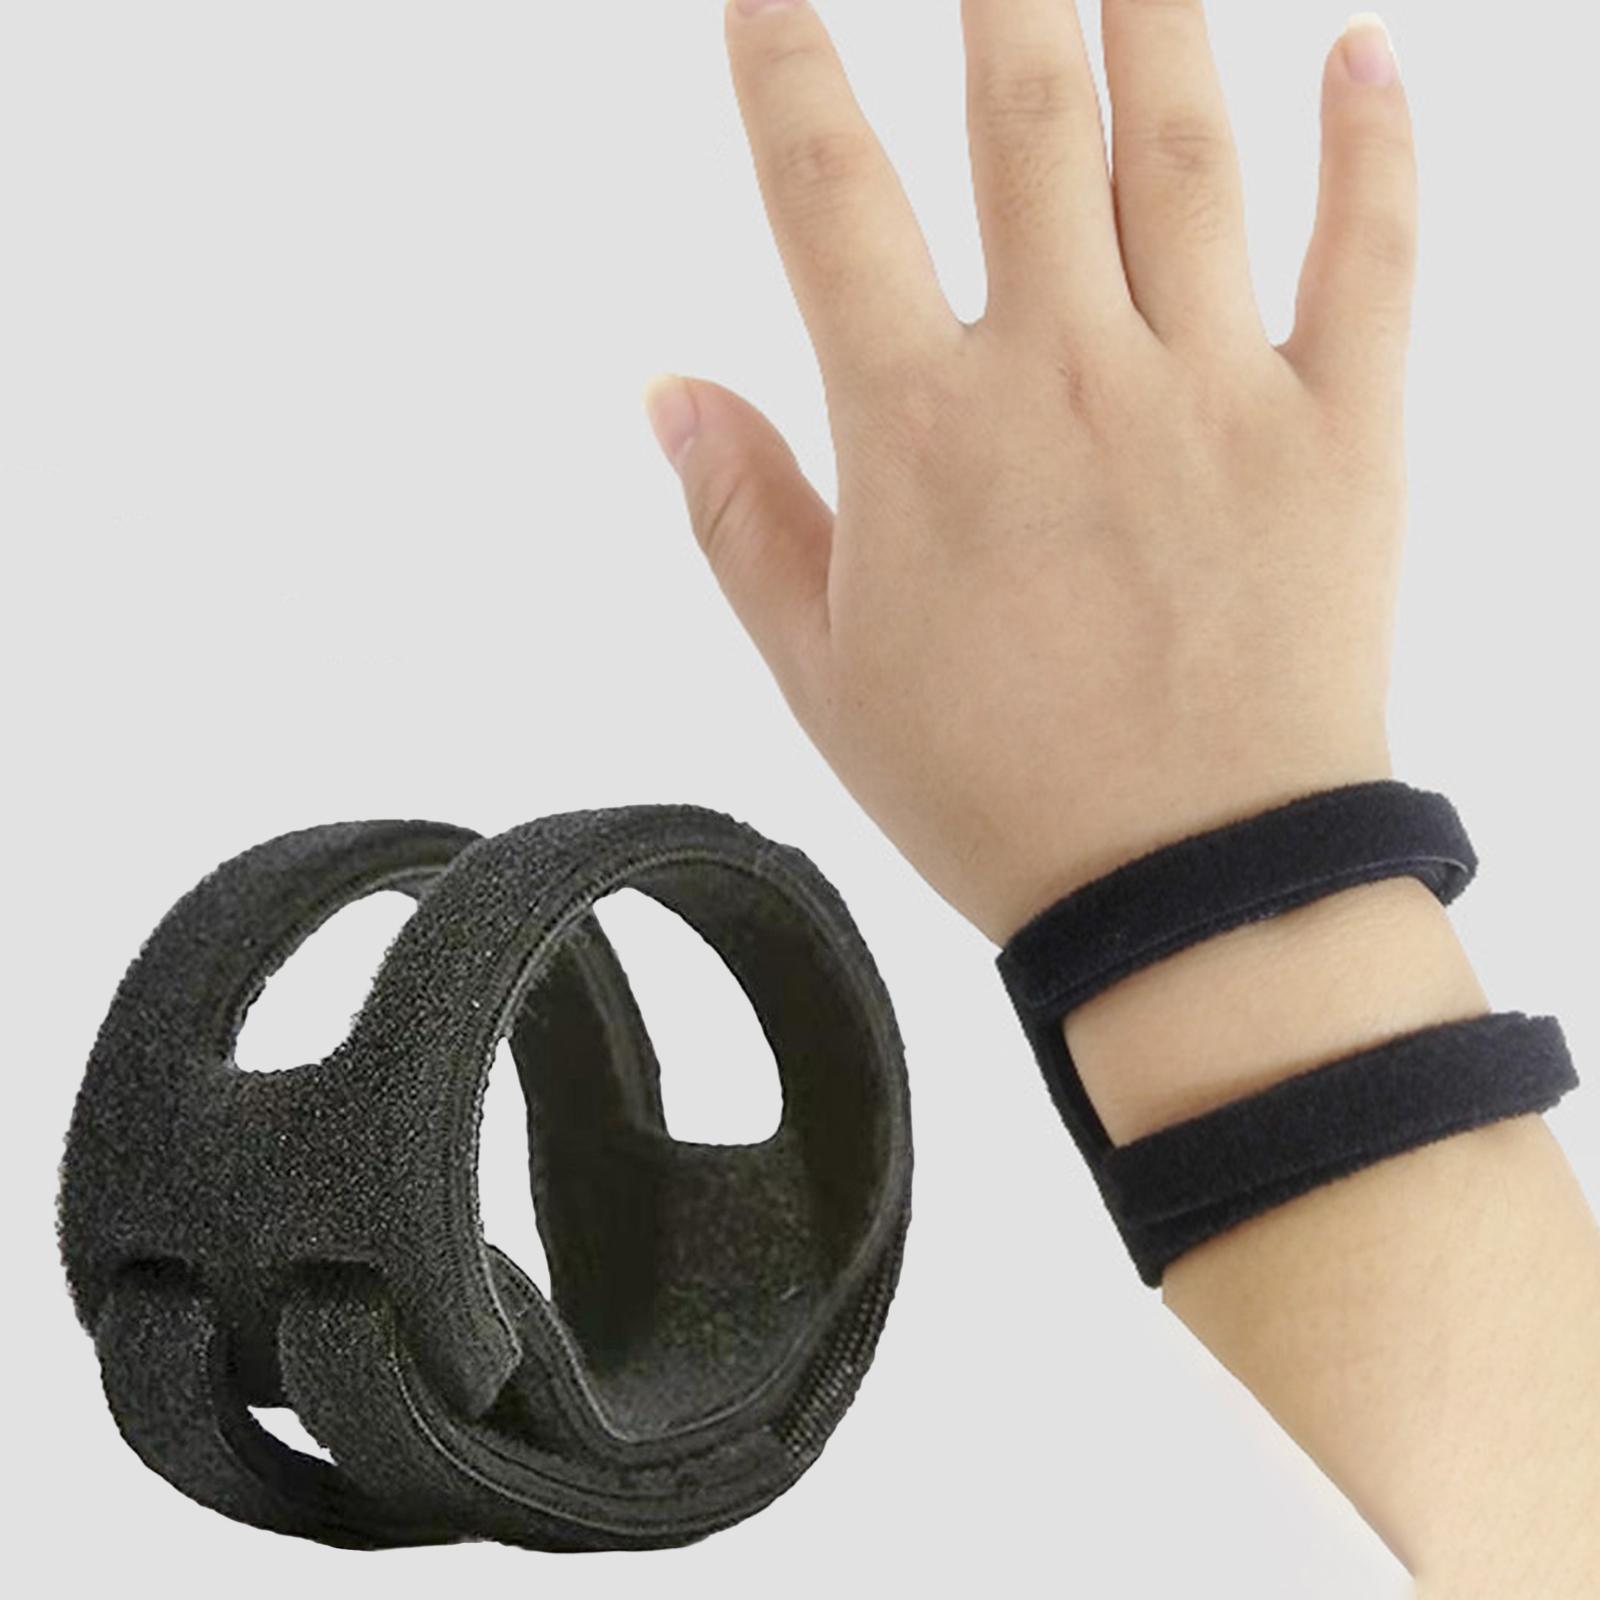 Wrist Brace Tfcc Tear Support Bands Straps for Sports Carpal Tunnel Exercise